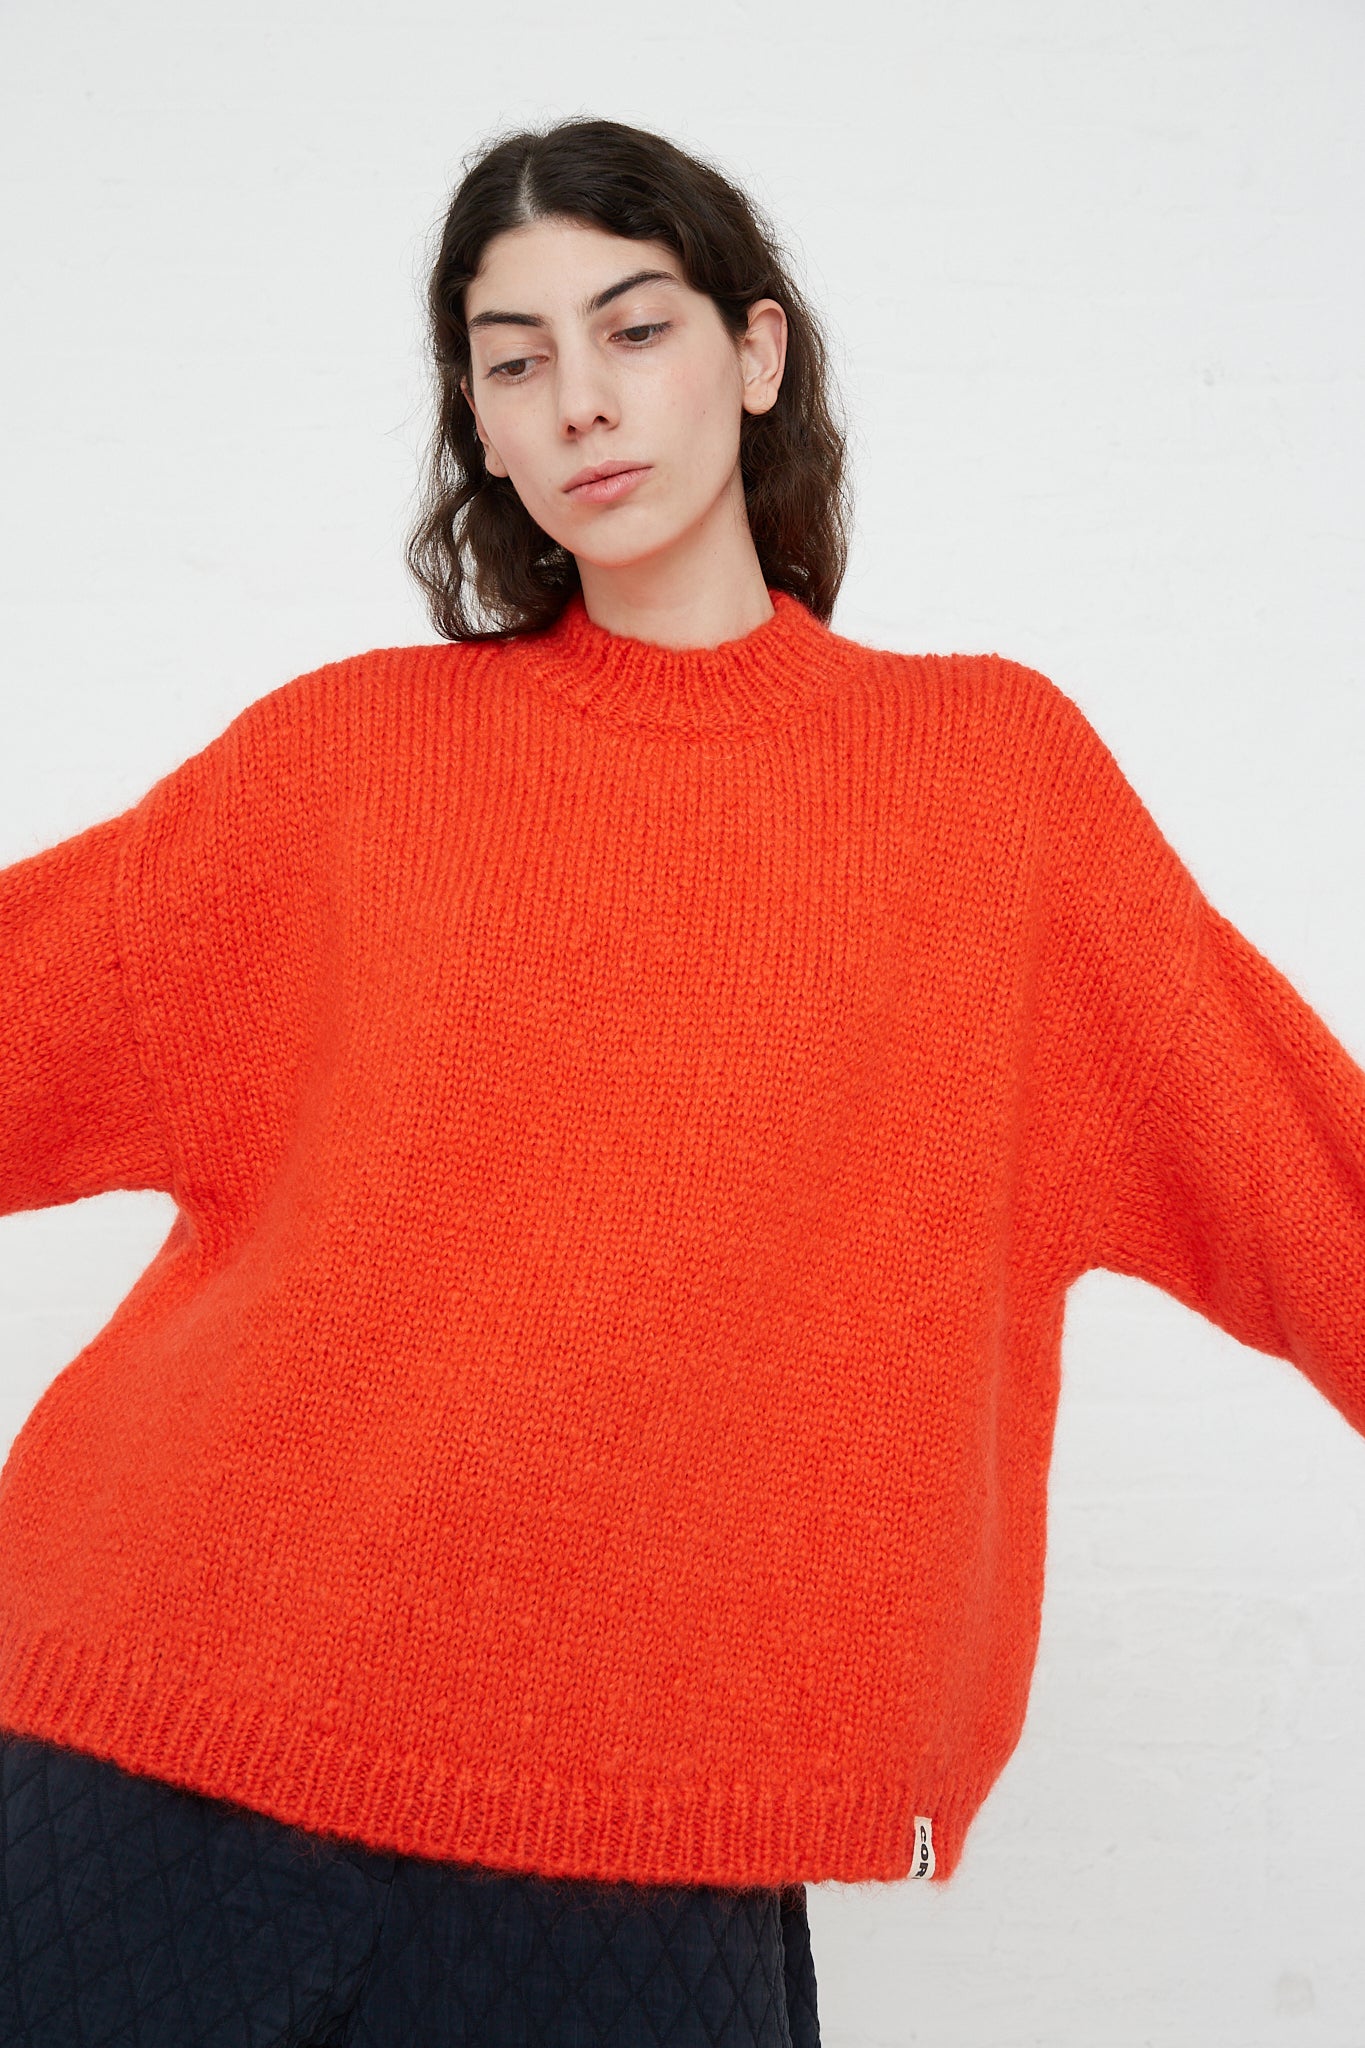 A model wearing a Cordera Mohair Sweater in Tangerine blend. Front view.